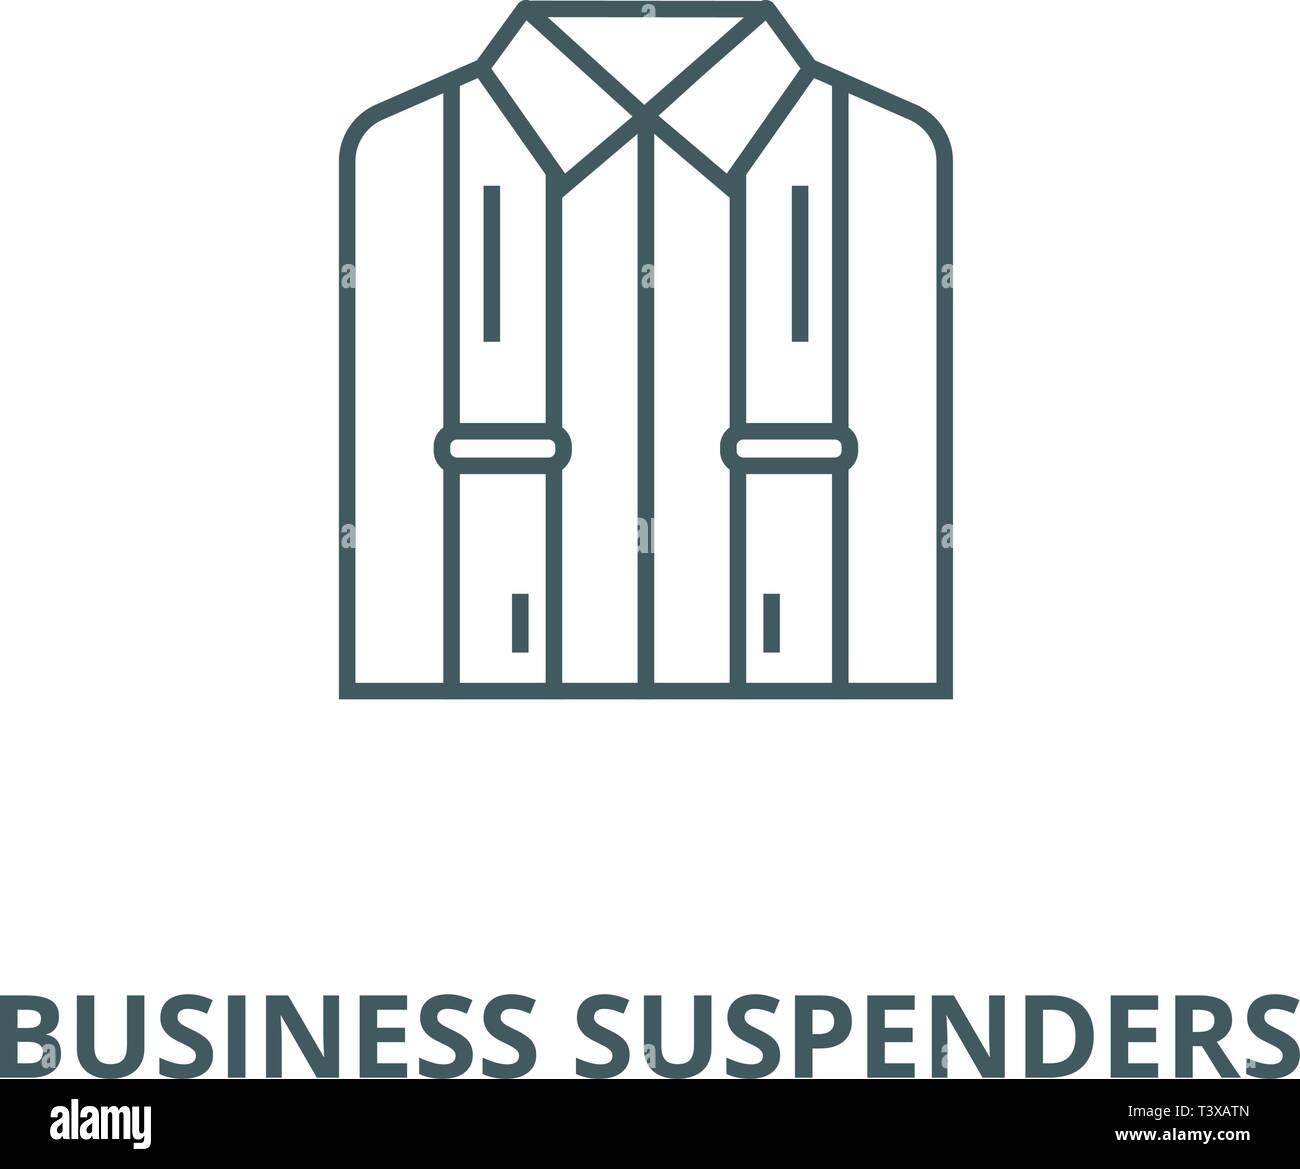 Business suspenders line icon, vector. Business suspenders outline sign, concept symbol, flat illustration Stock Vector